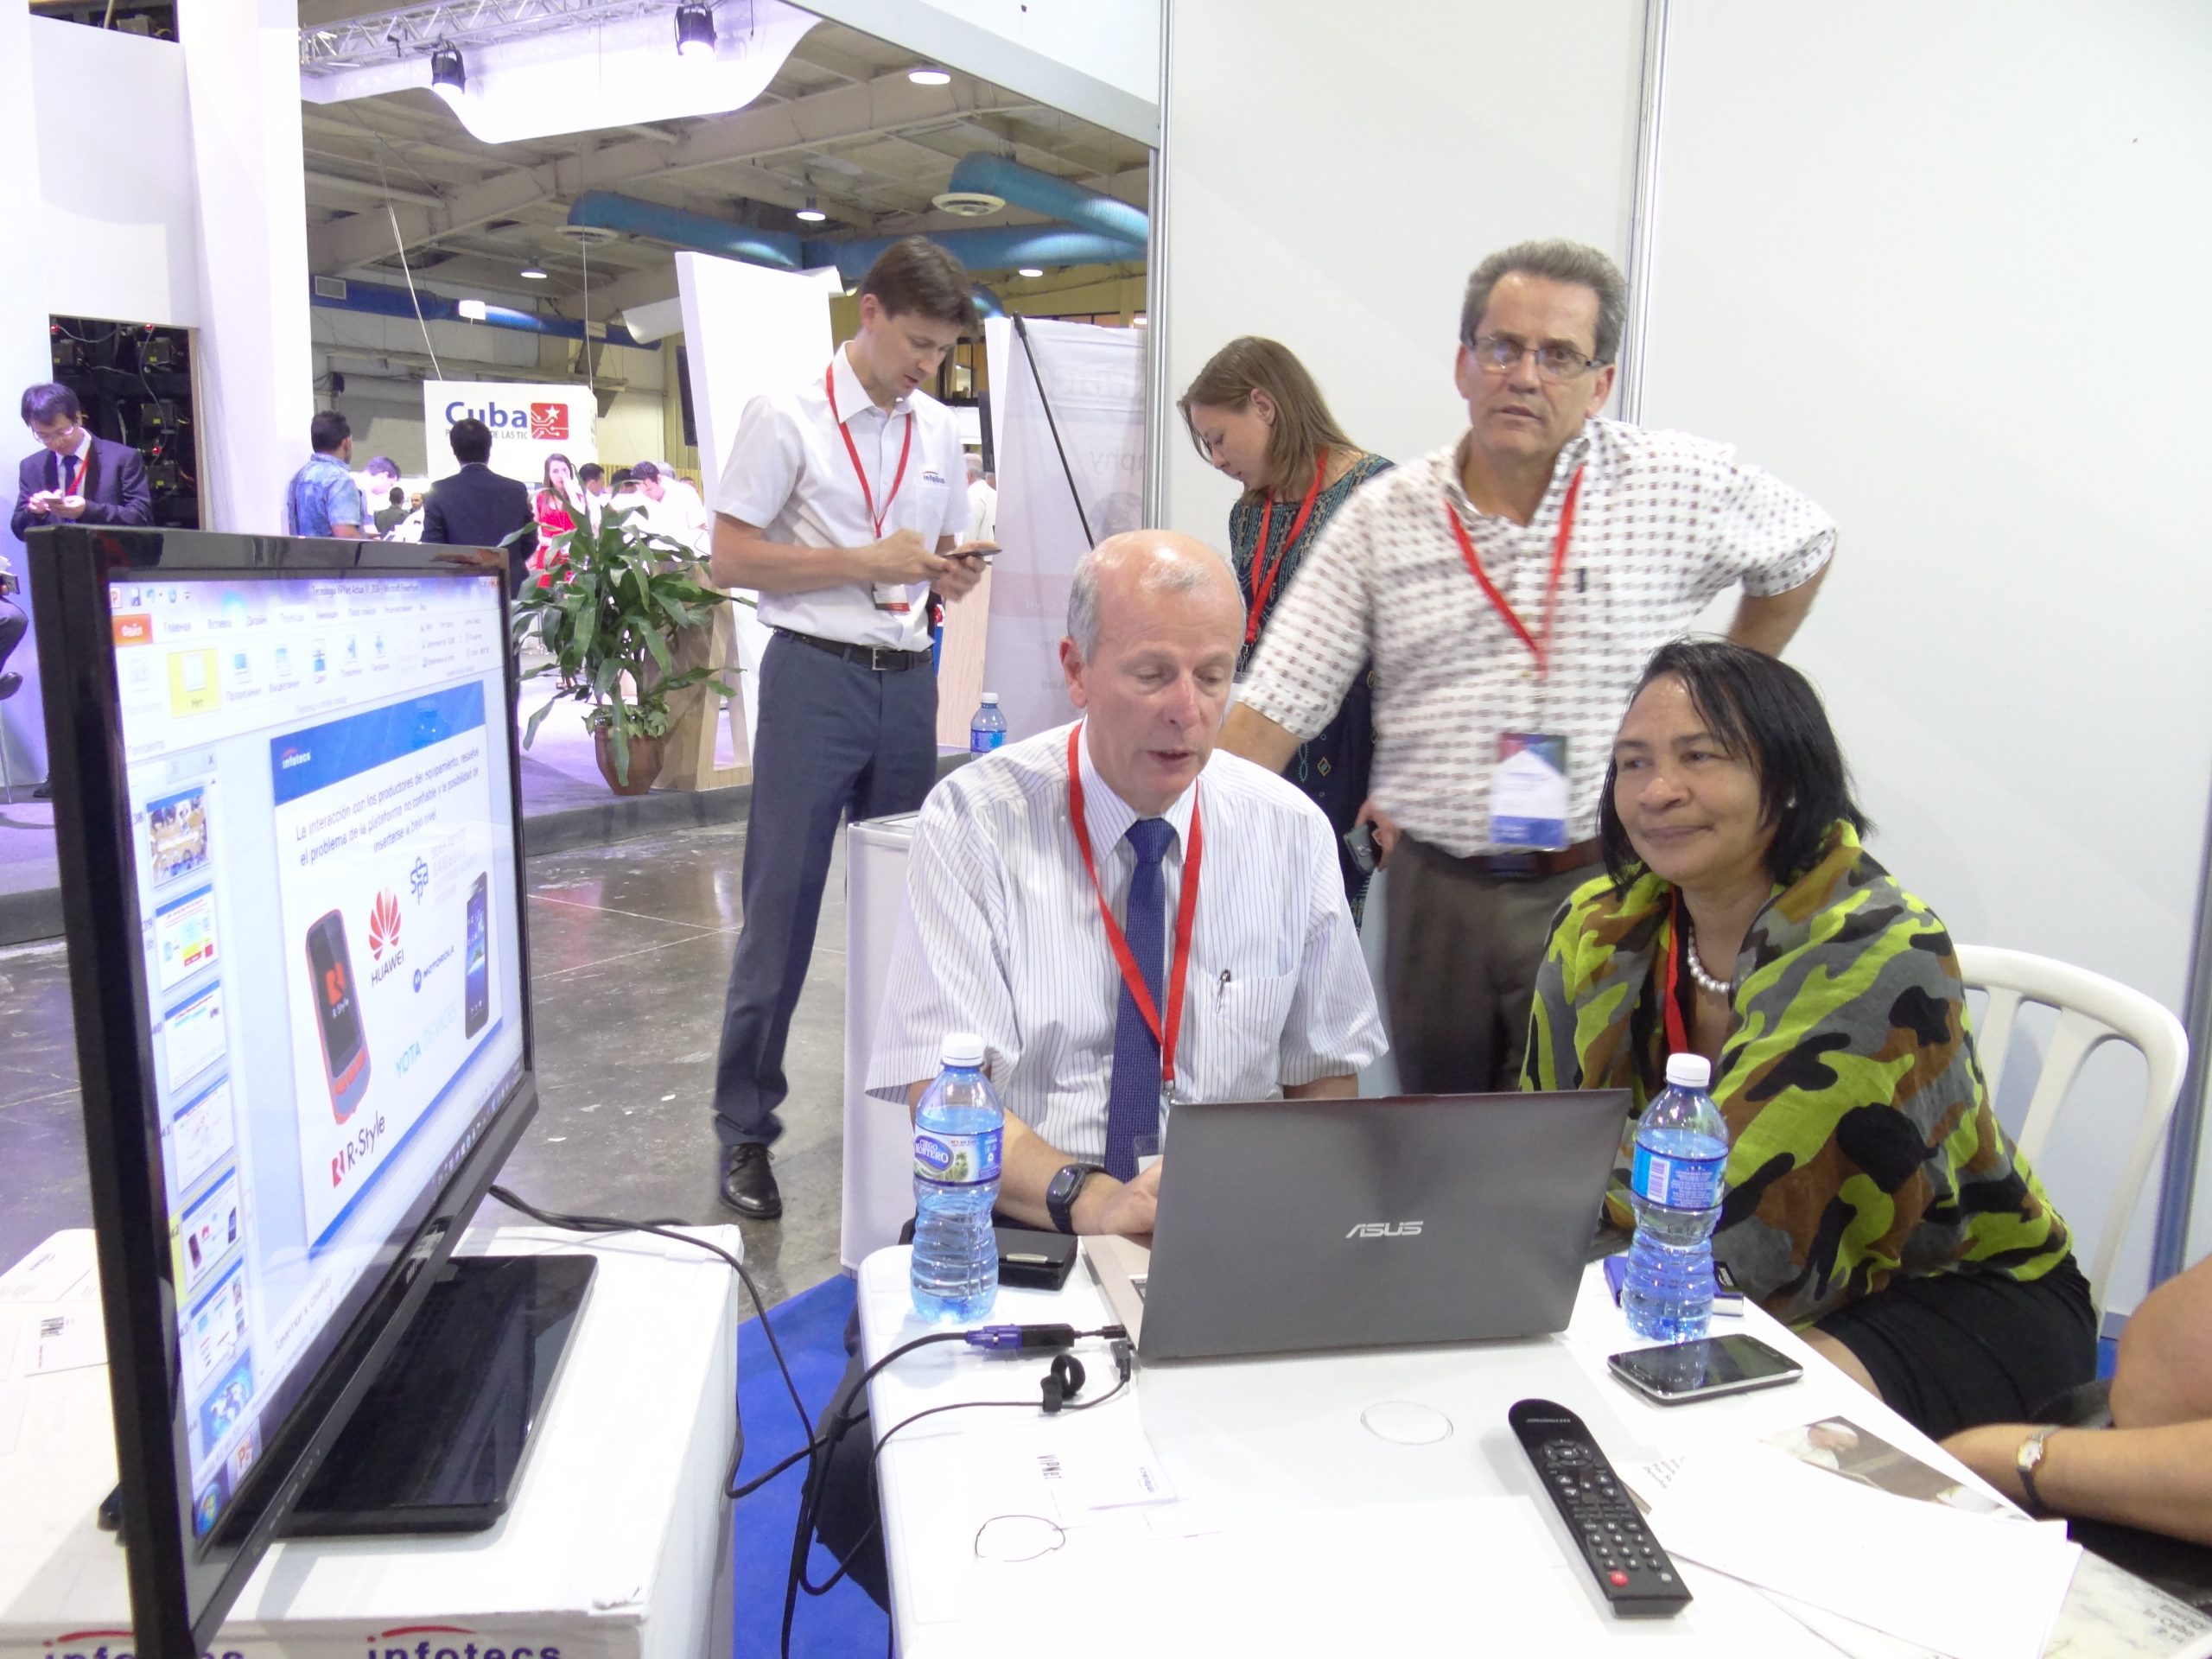 2016 Miriam Nicado, member of the State Council of Cuba and then-Rector of the Cuban University of Computer Science, accompanied by a Russian INTEREVM representative